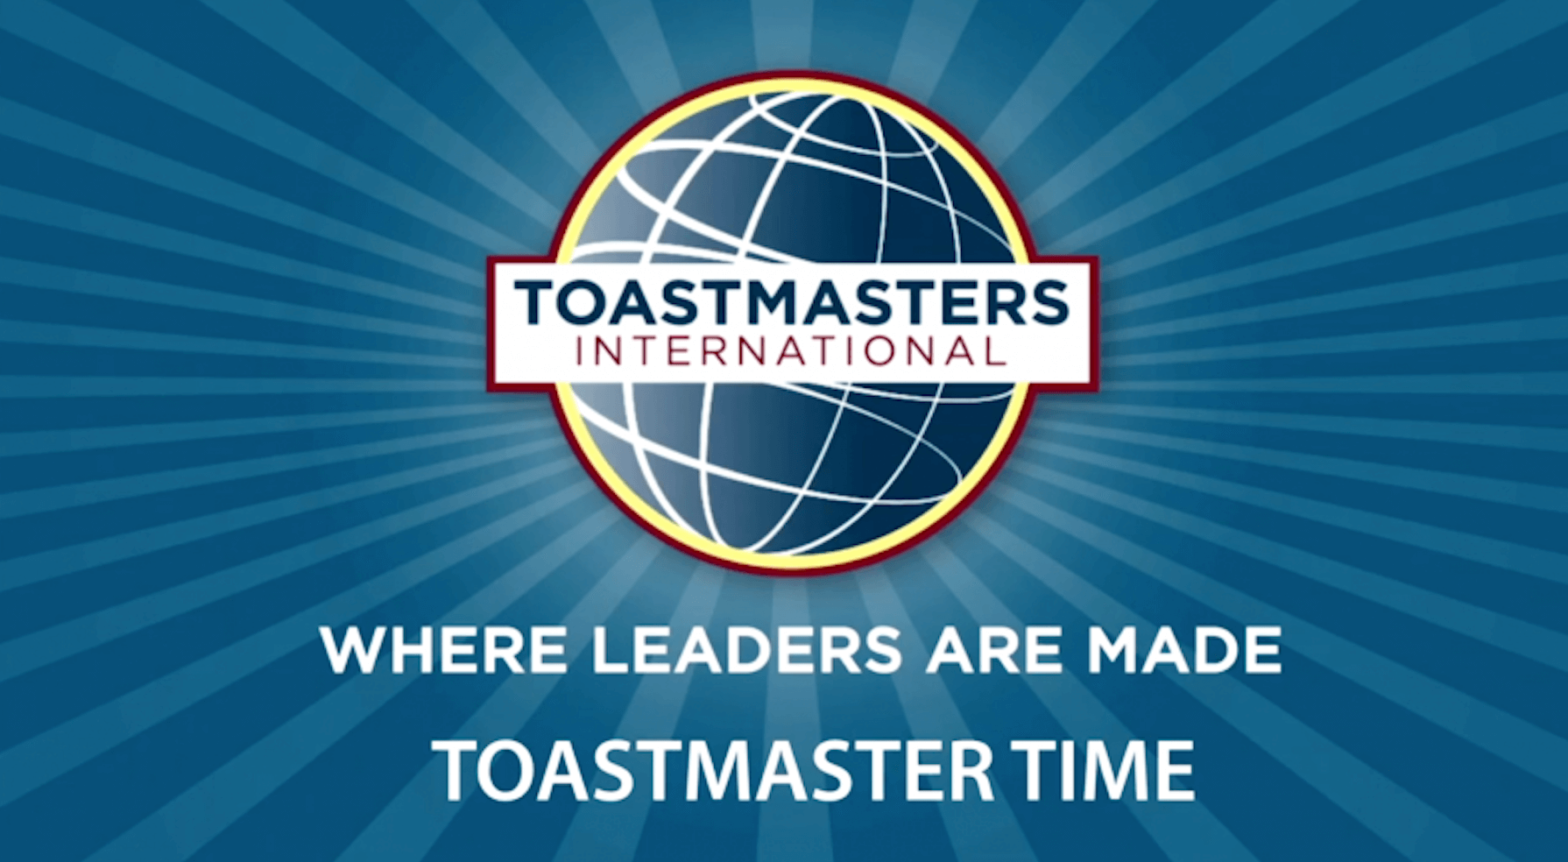 toastmasters-everything-you-need-to-know-before-joining-keynote-speaker